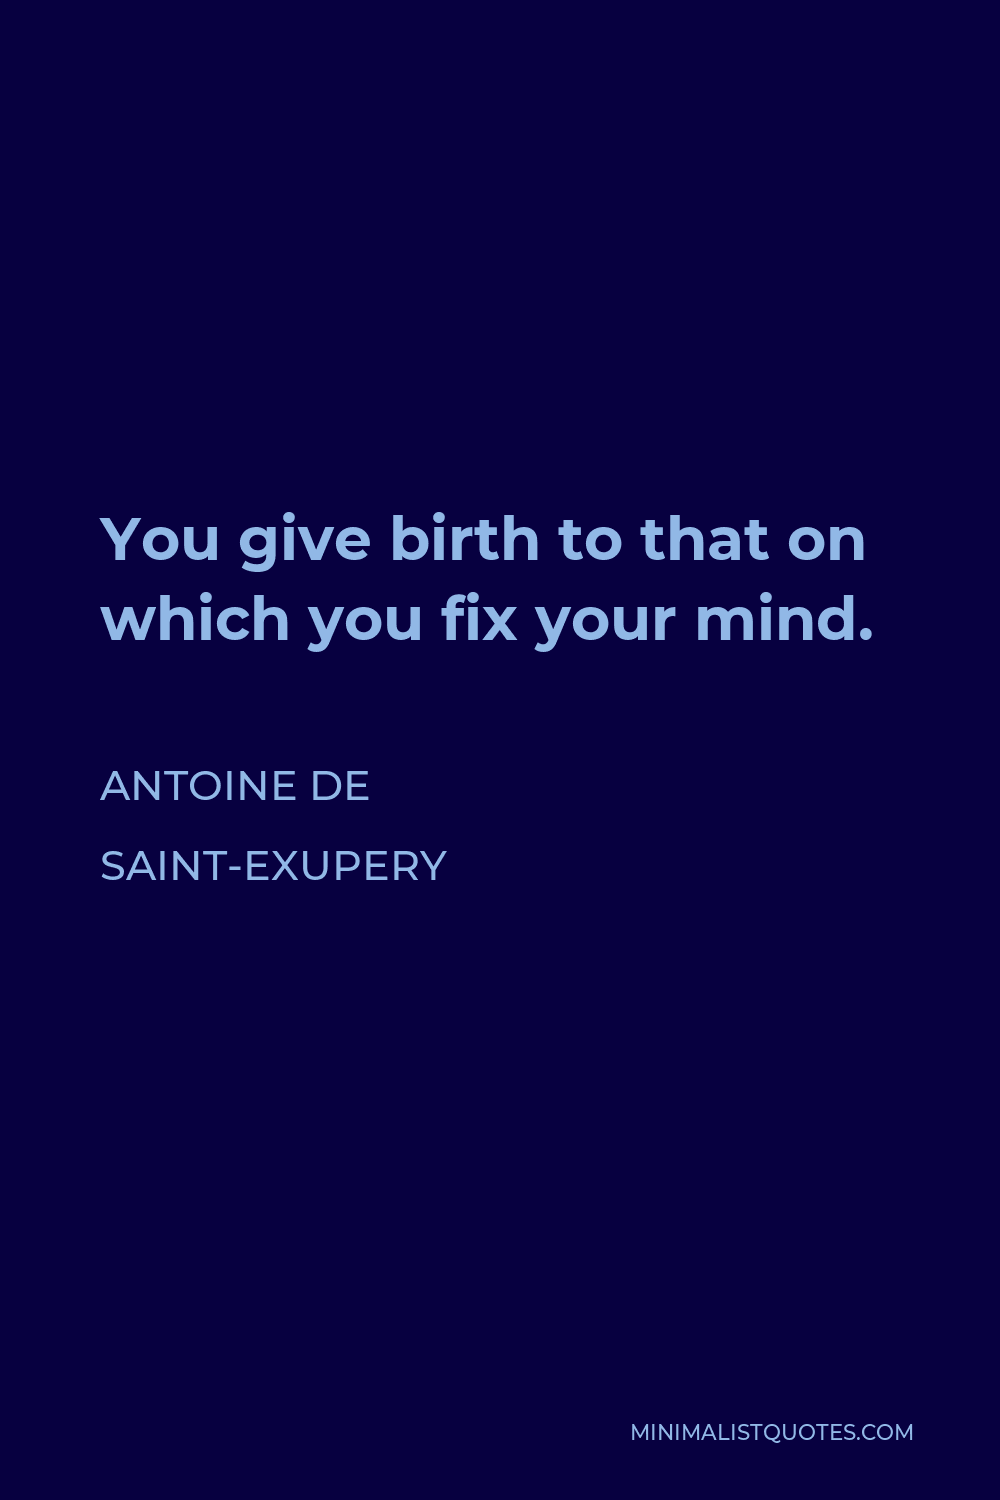 Antoine de Saint-Exupery Quote - You give birth to that on which you fix your mind.